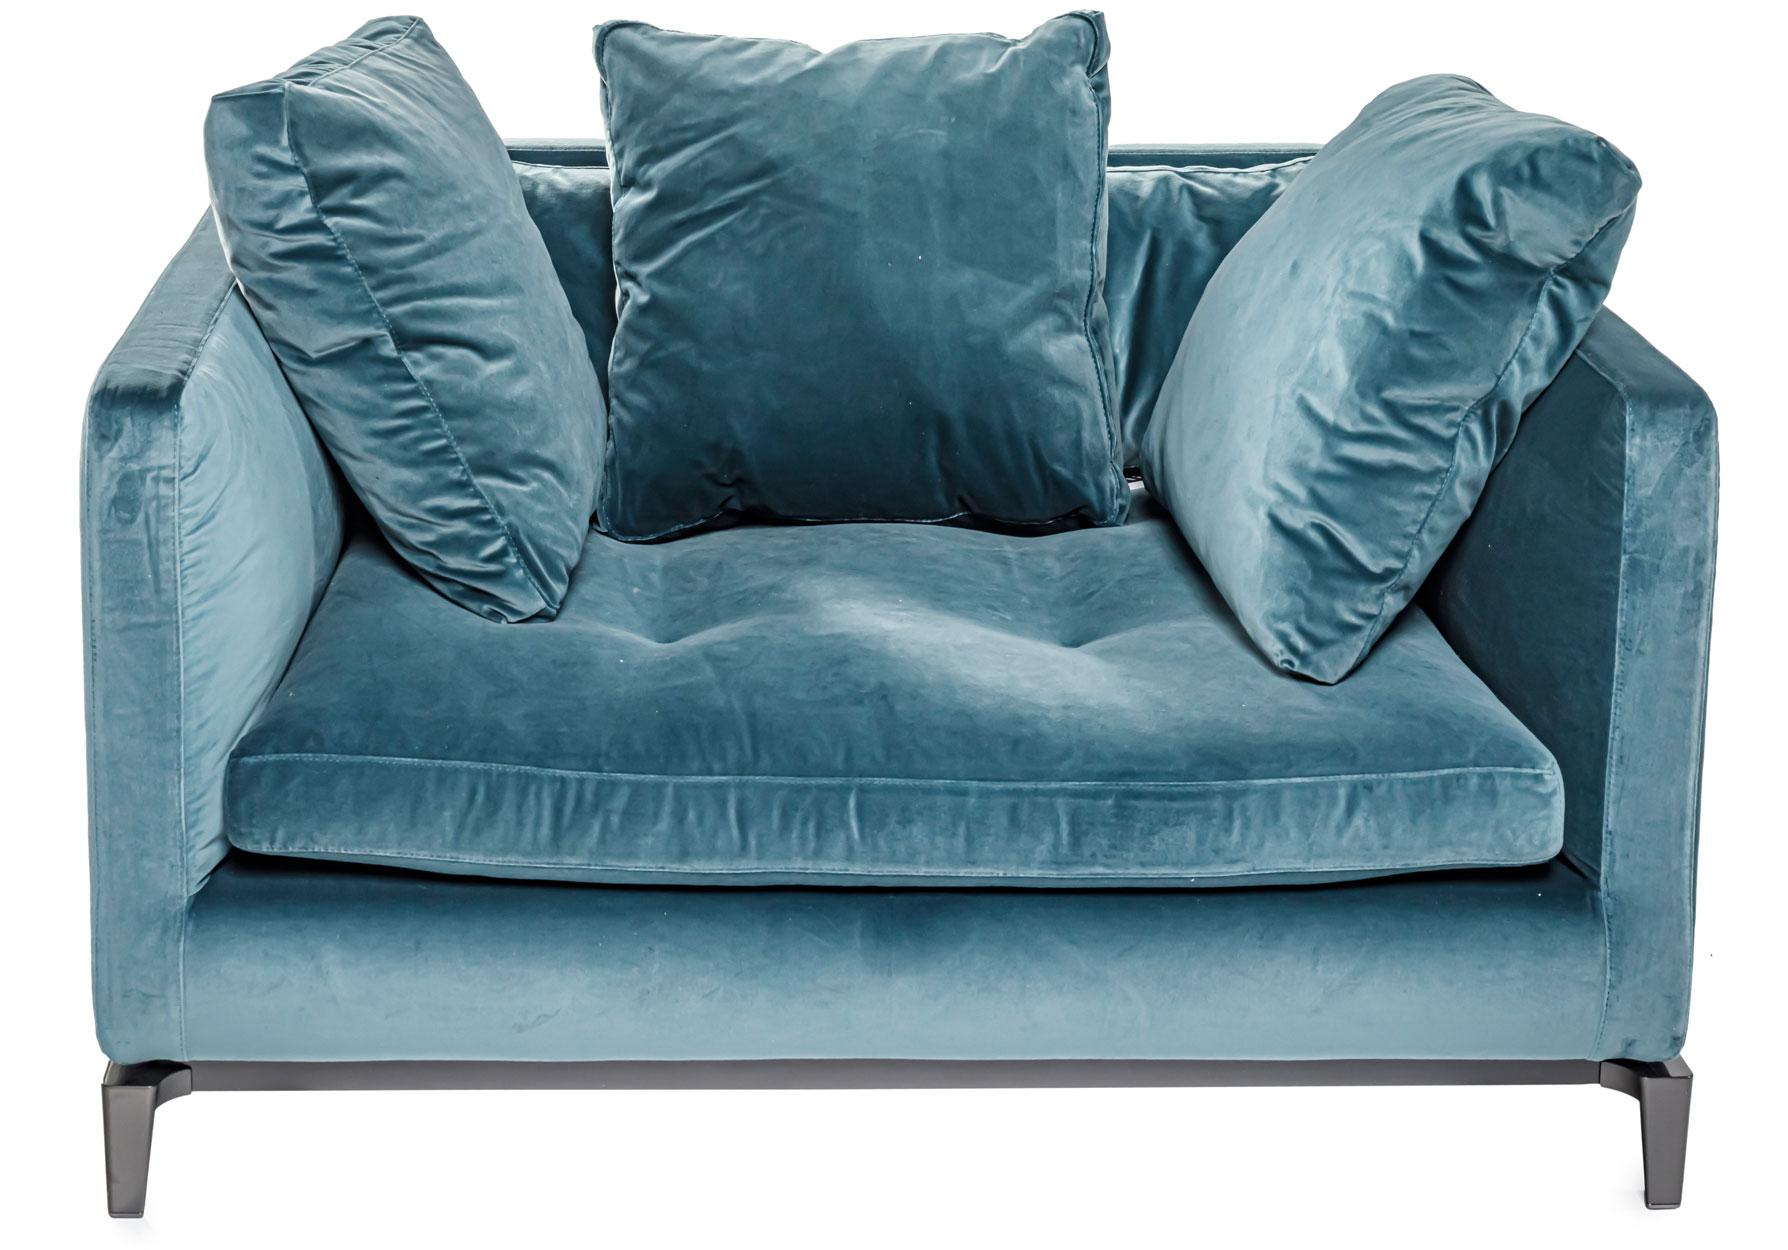 A love chair and ottoman set completely covered in a light blue velour fabric featuring quilted details on the ottoman and seat cushions. Love chair and ottoman sit on metal legs with a pewter finish. Includes additional accent pillows. 
Design by